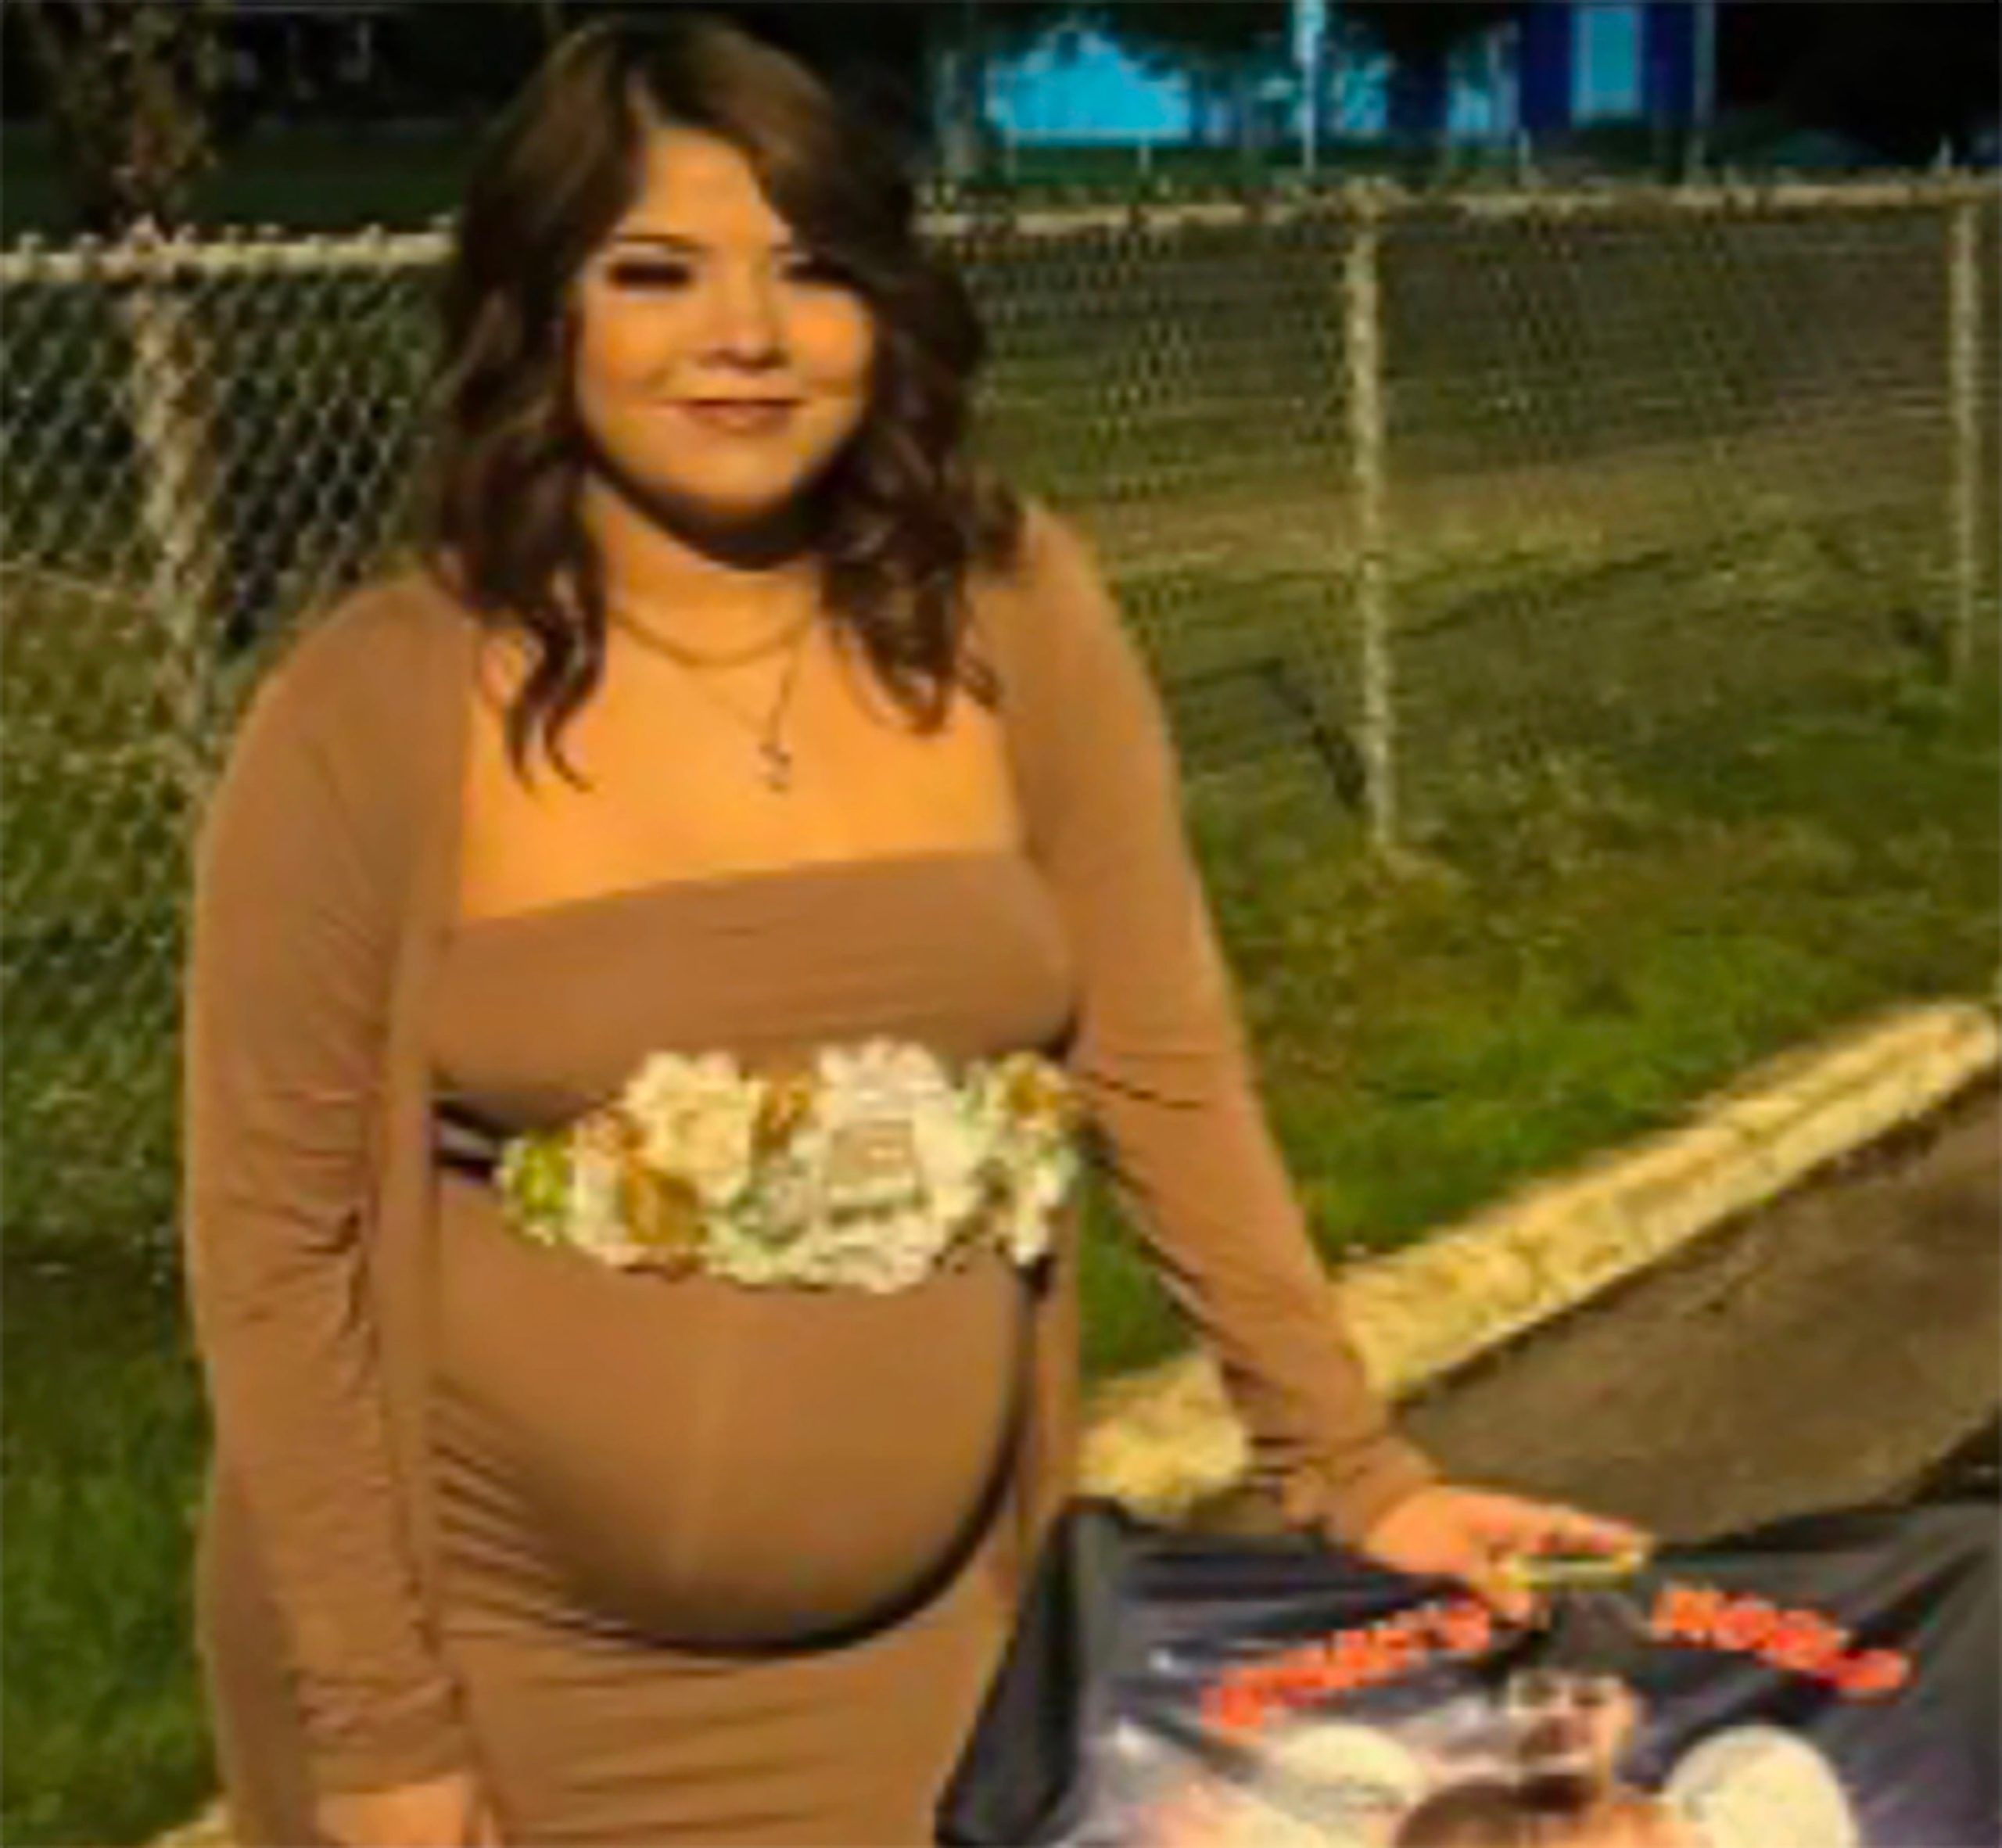 The death of a pregnant teen and her boyfriend now being investigated as a capital murder case